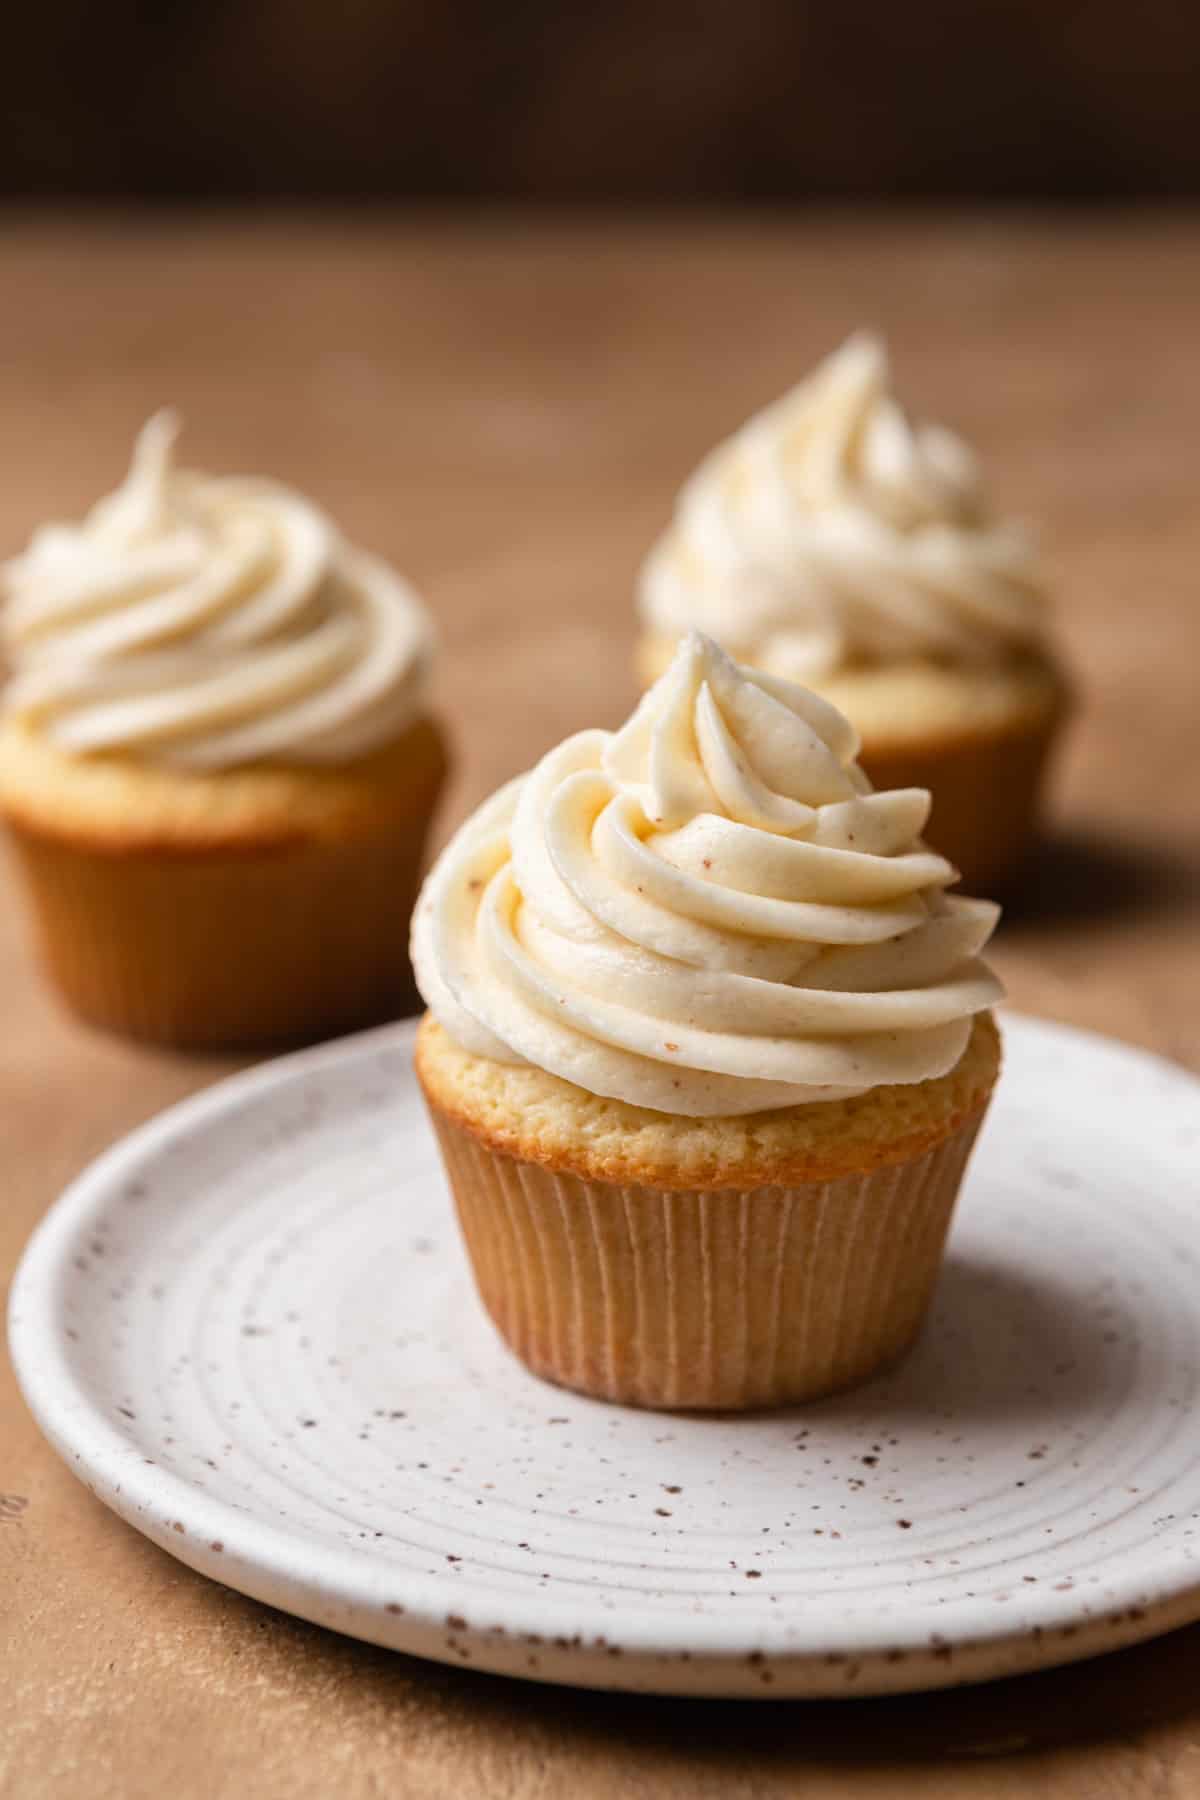 Vanilla cupcakes with oil on a tan surface with one on a white plate.